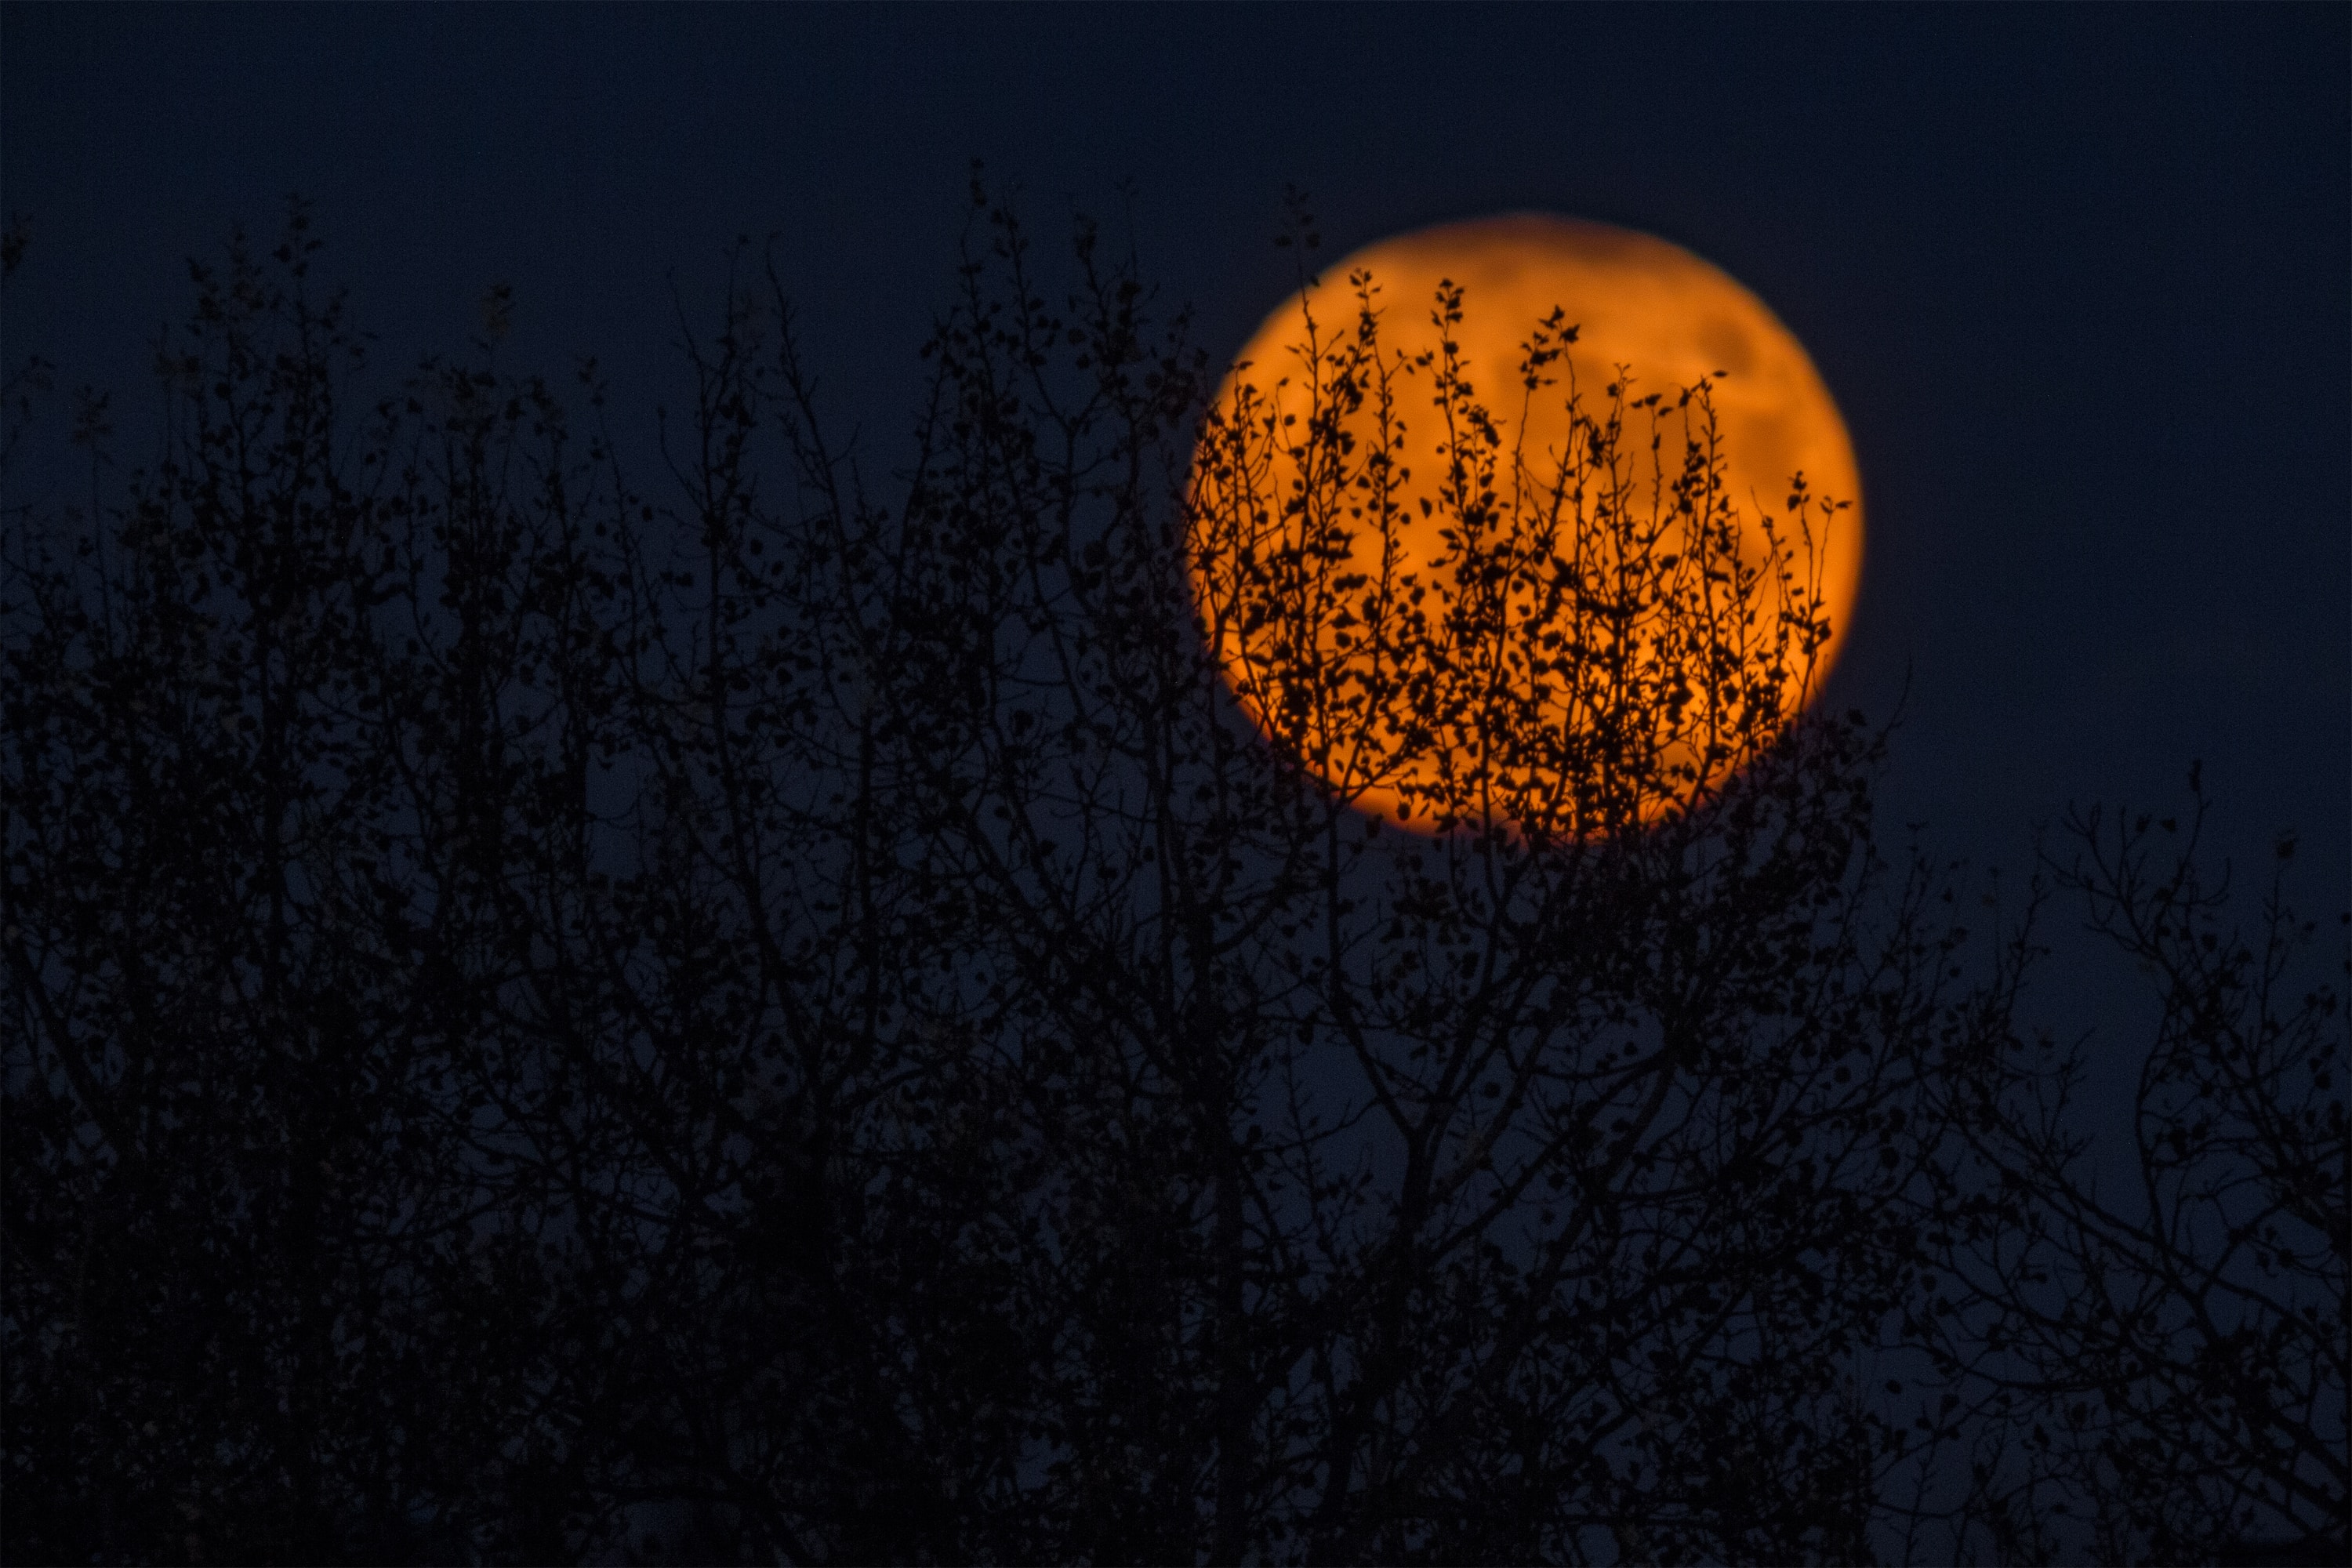 A Full Red Moon Behind Tree Branches